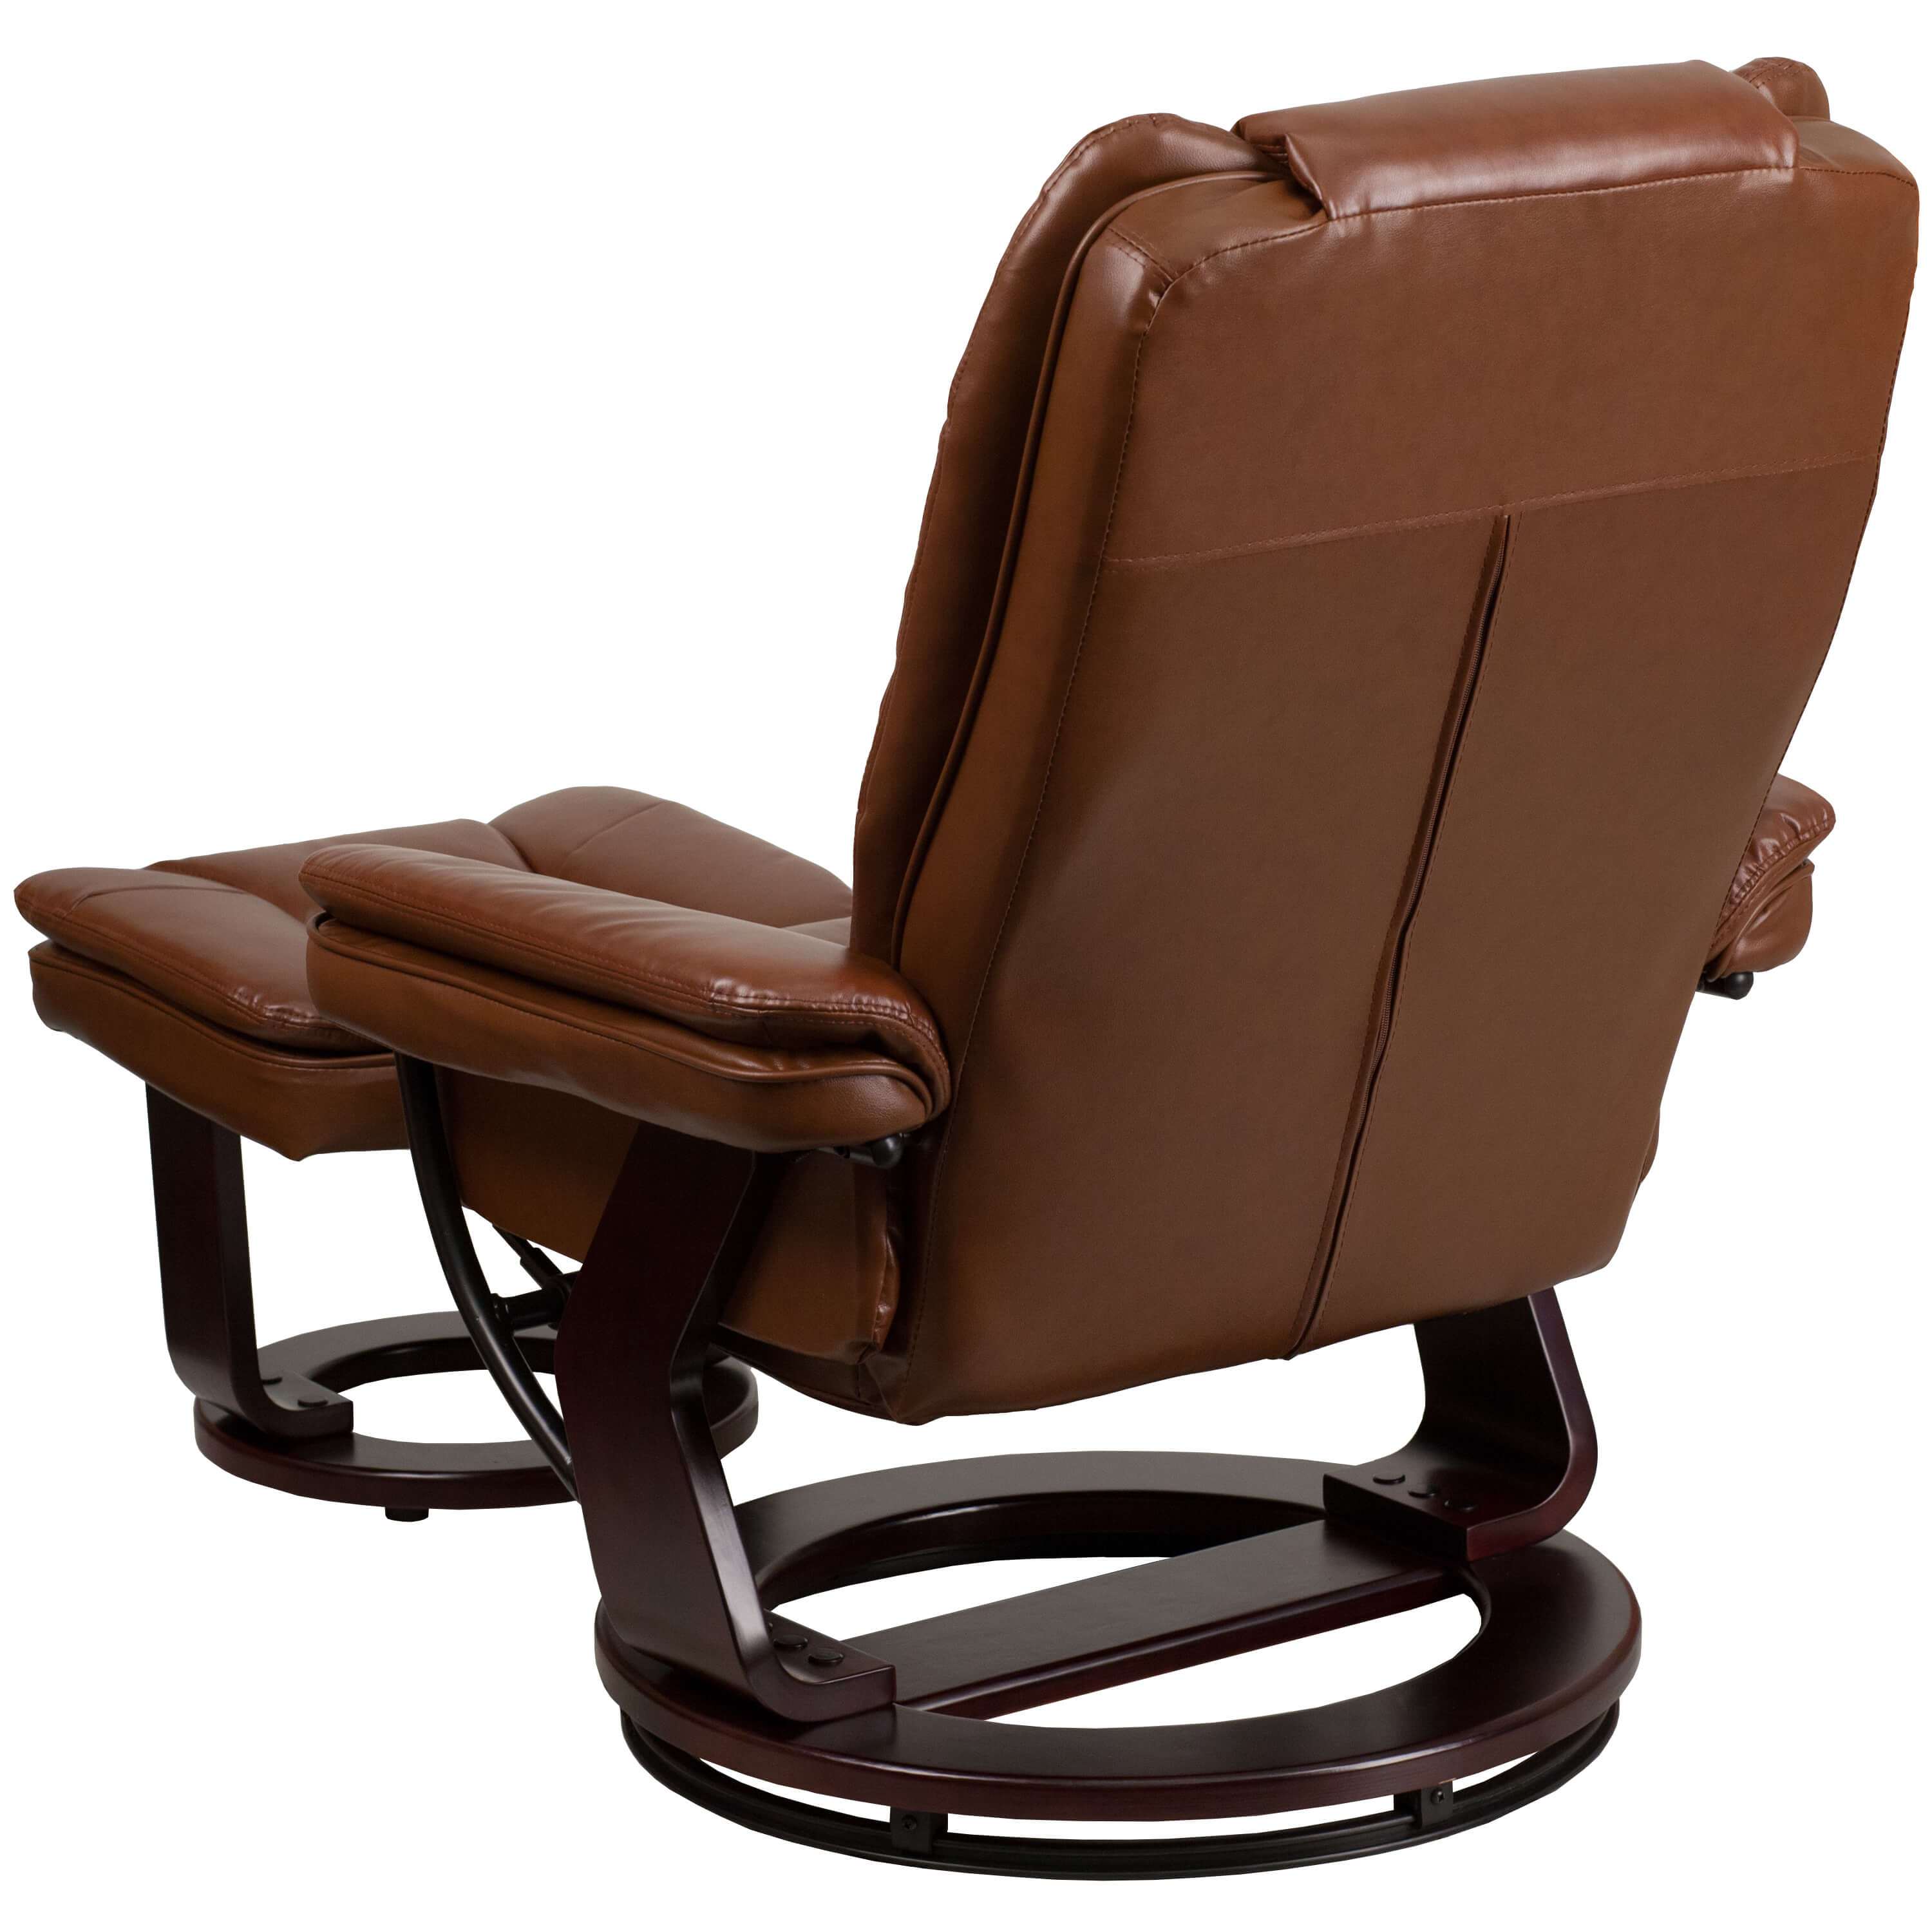 Contemporary recliner chair back view